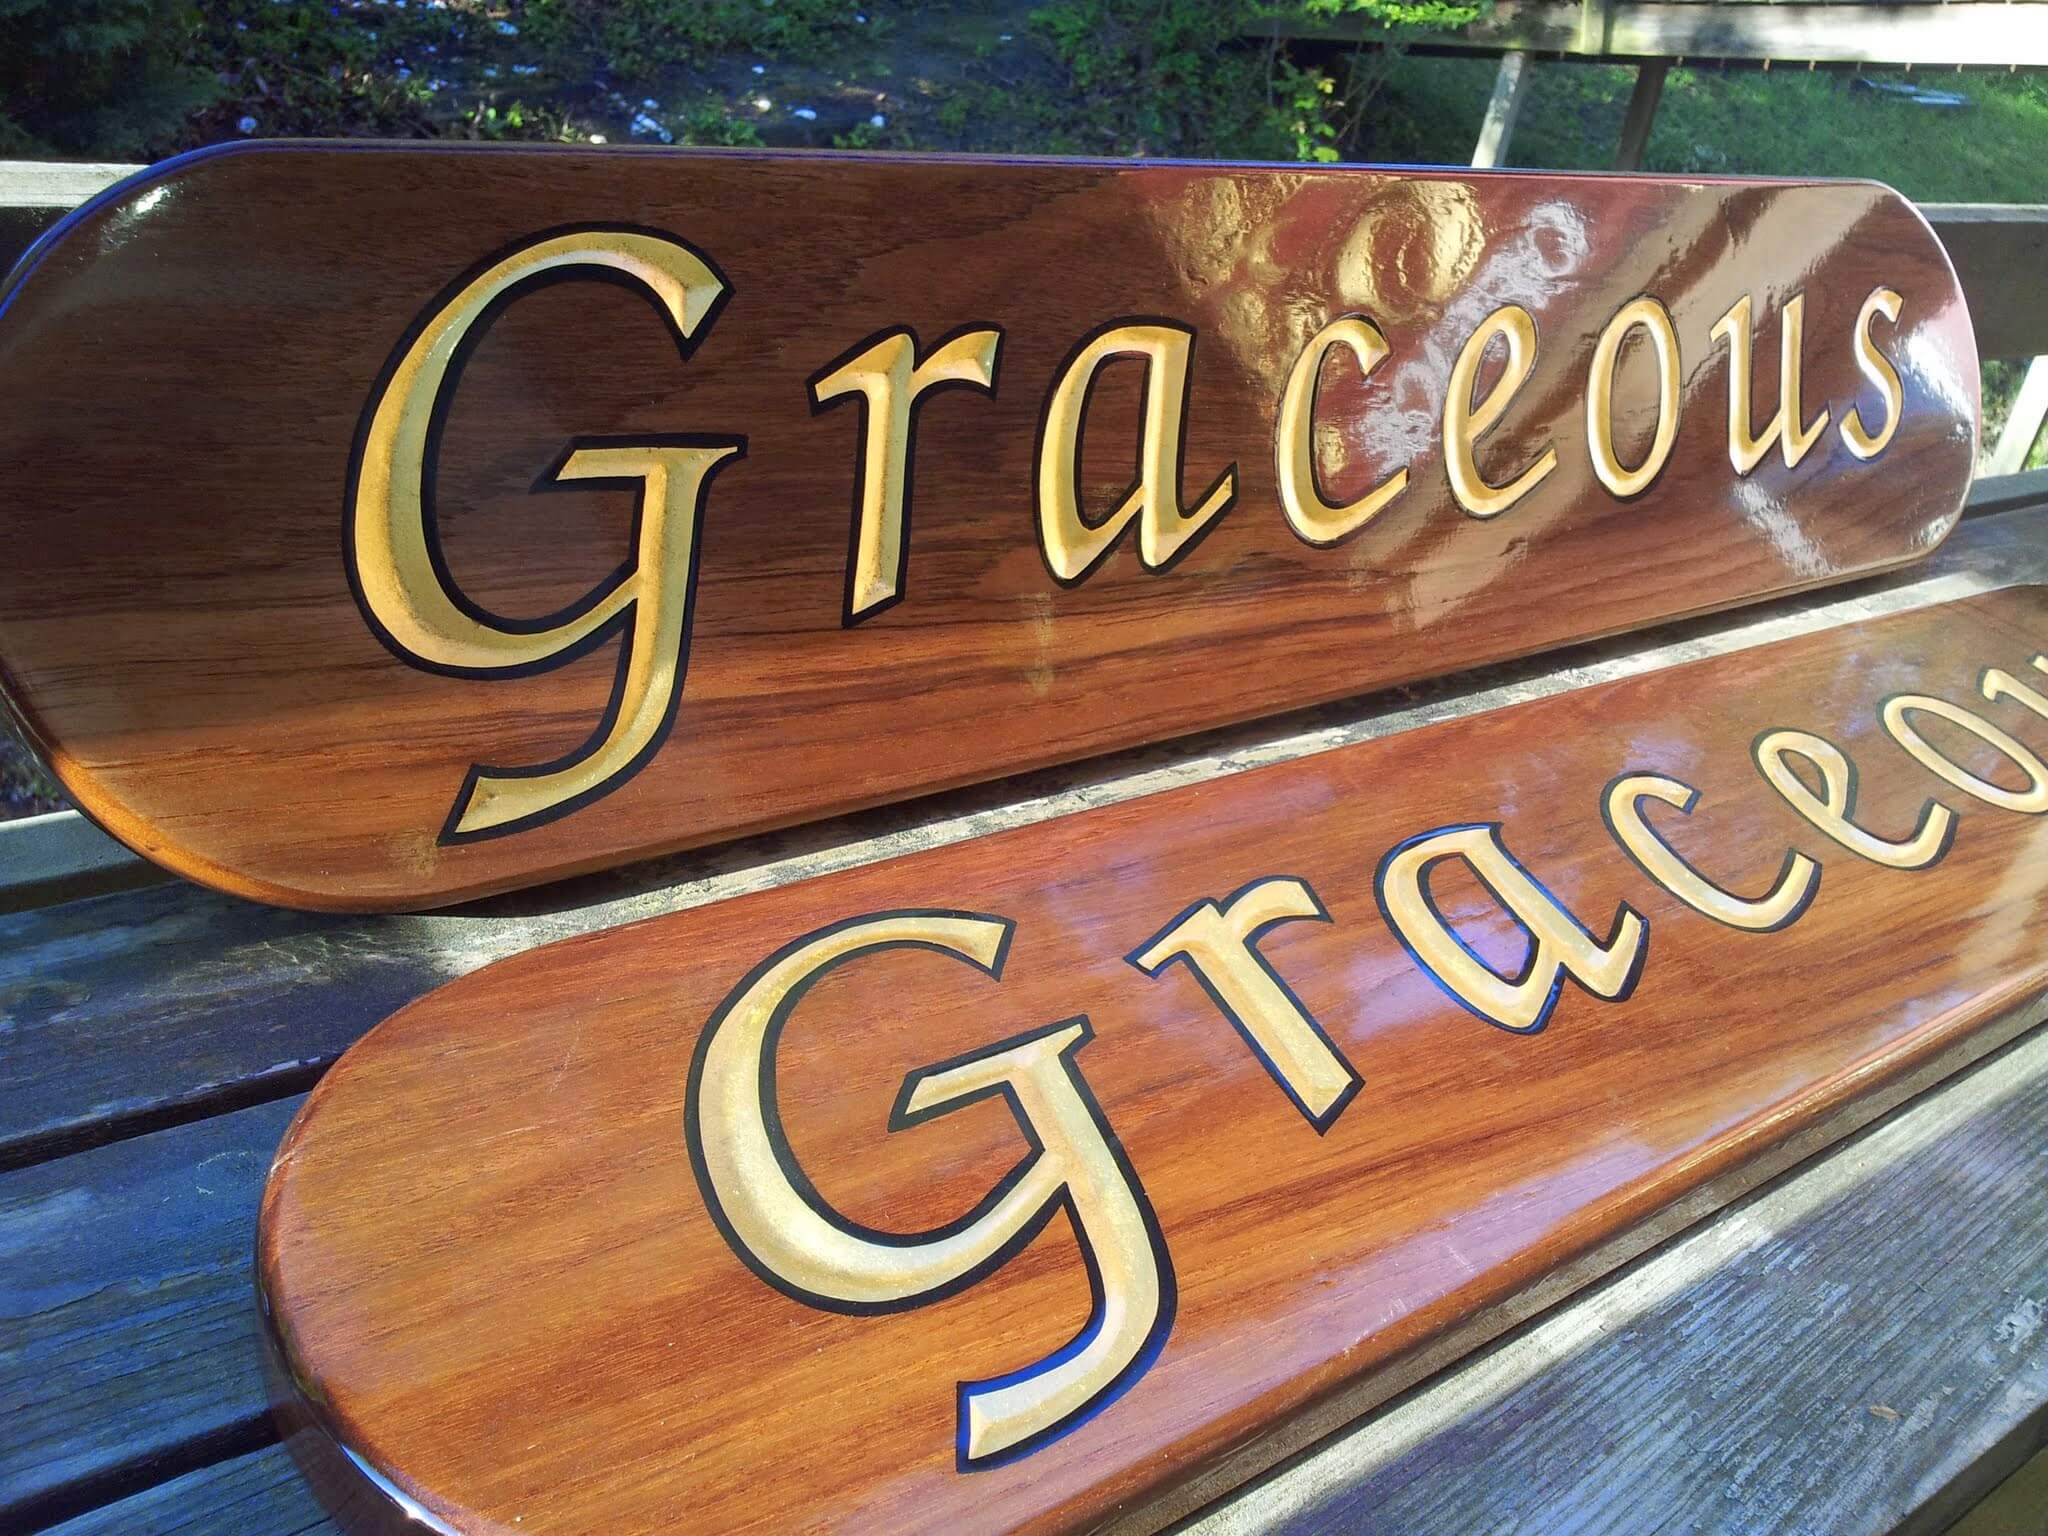 Carved letters with gold leaf